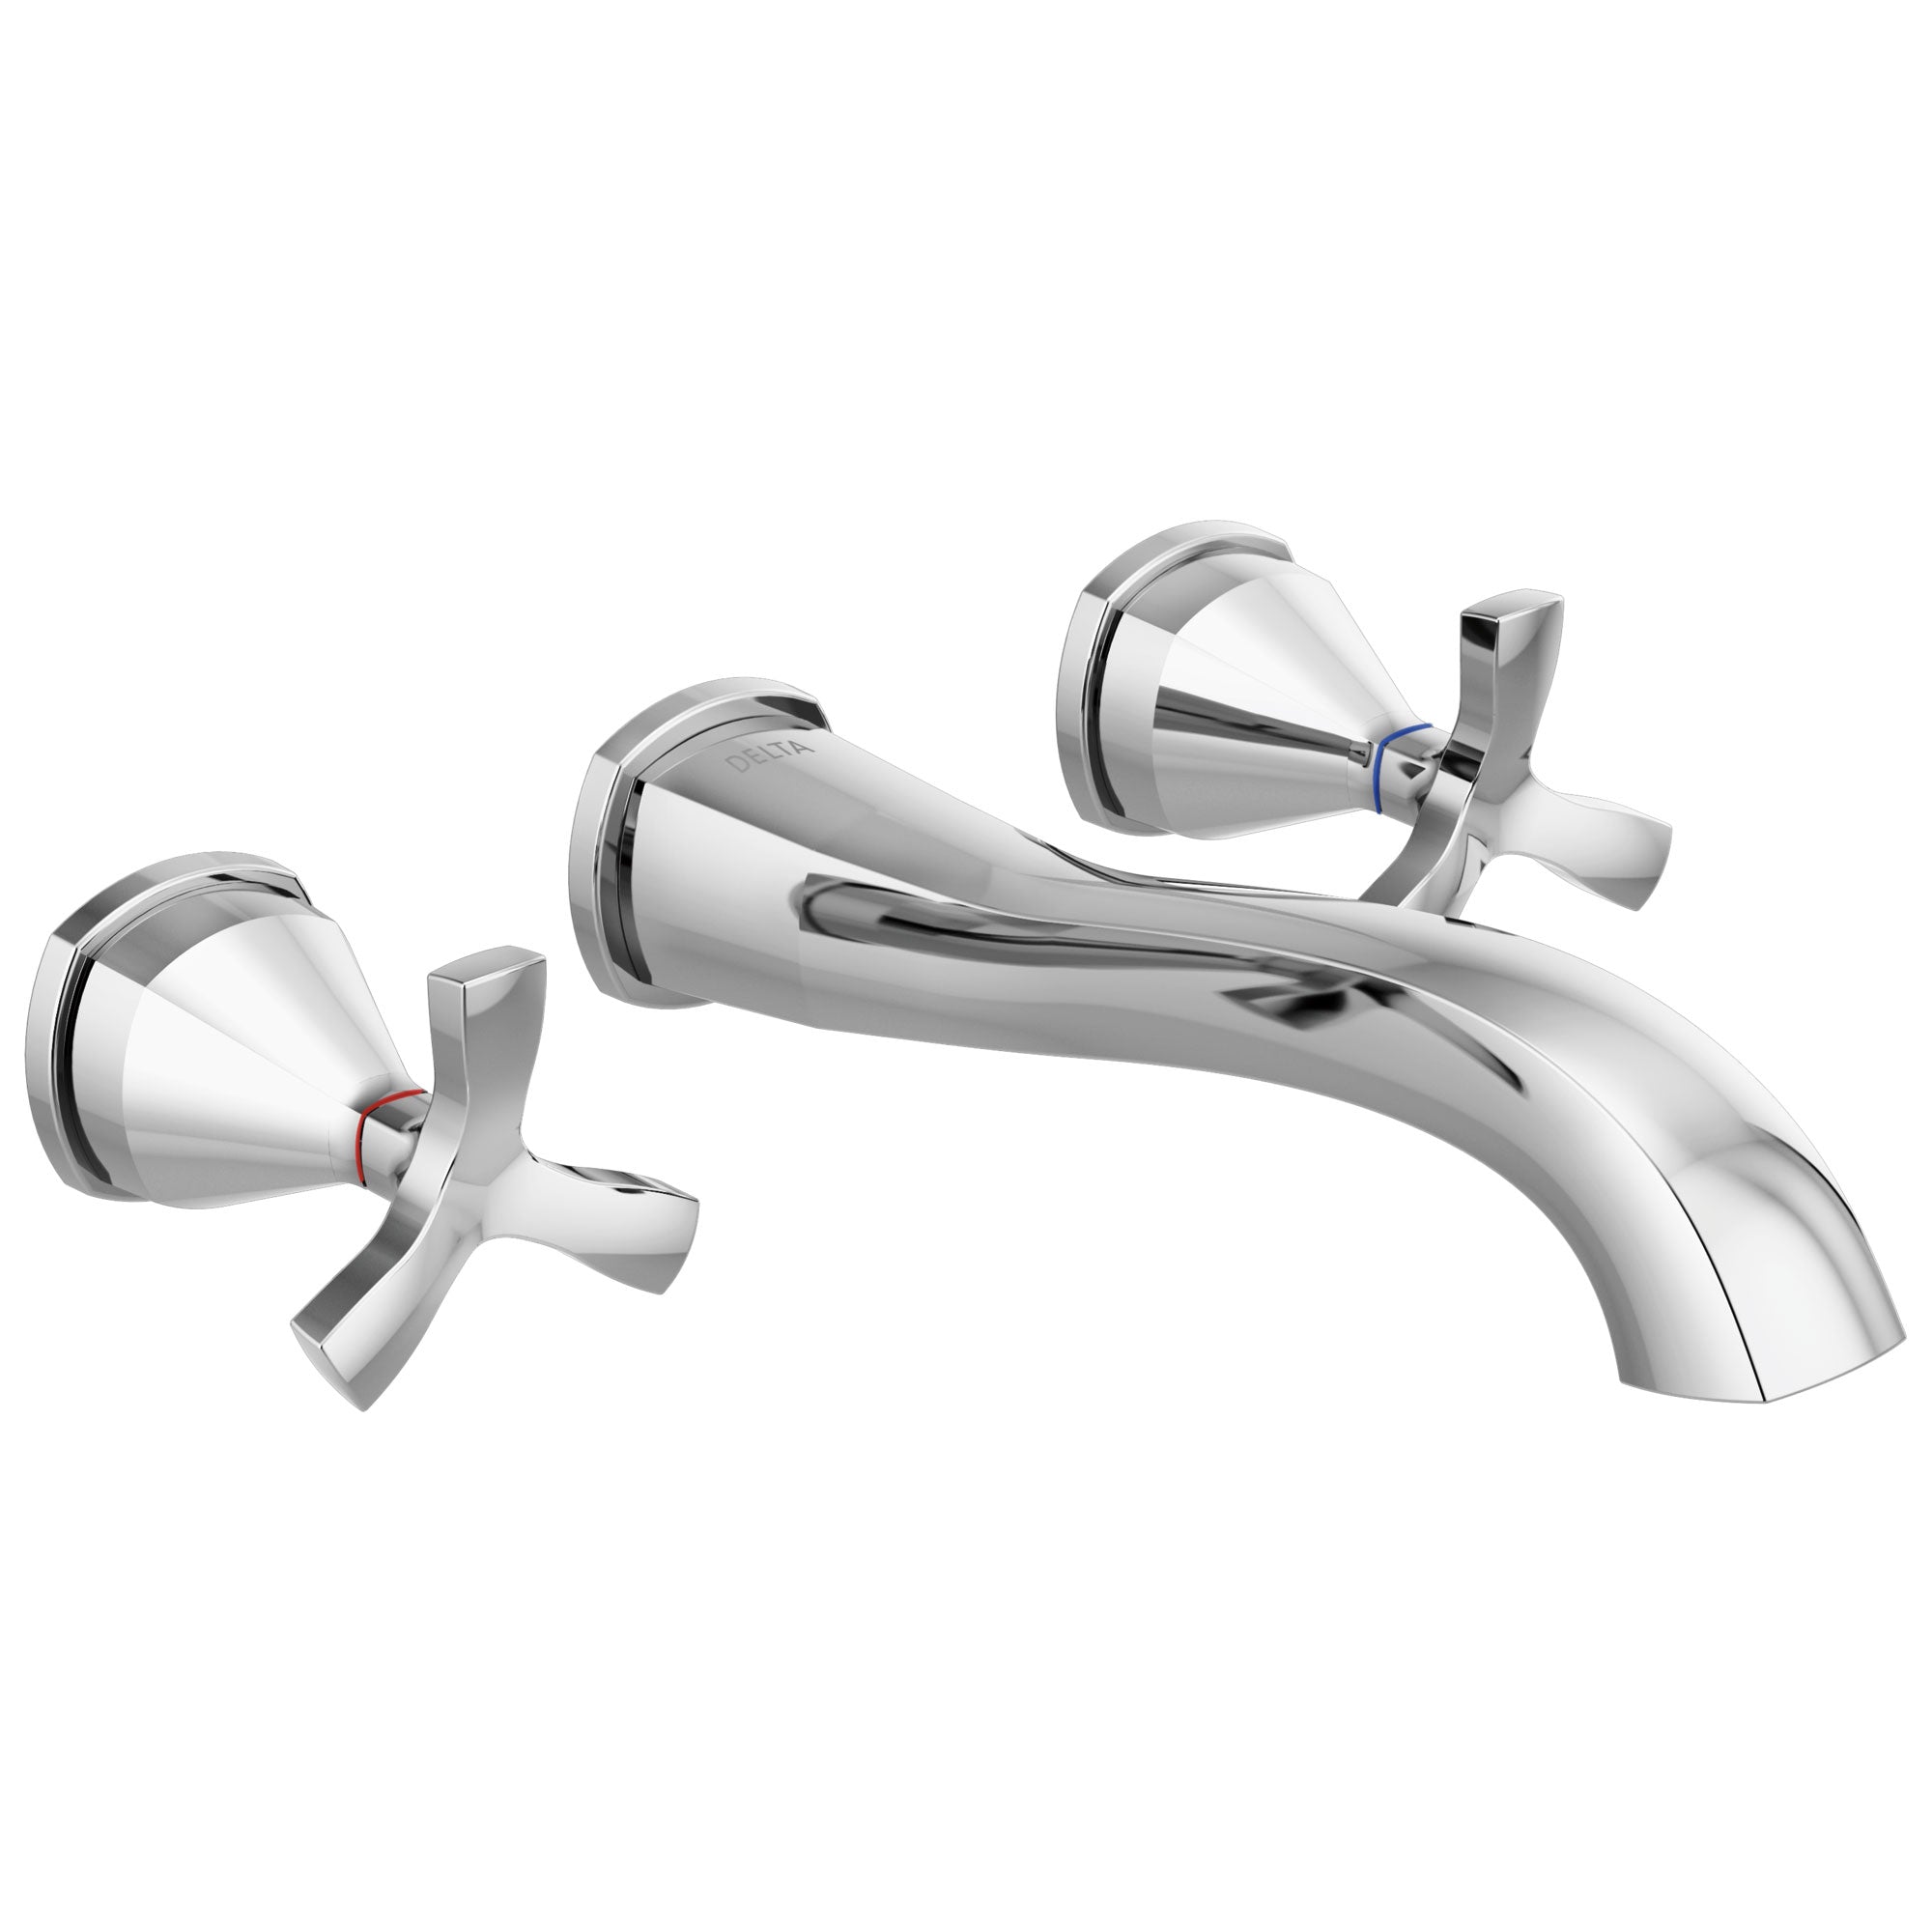 Delta Stryke Chrome Finish Cross Handle Wall Mounted Bathroom Faucet Trim Kit (Requires Valve) DT35766LFWL